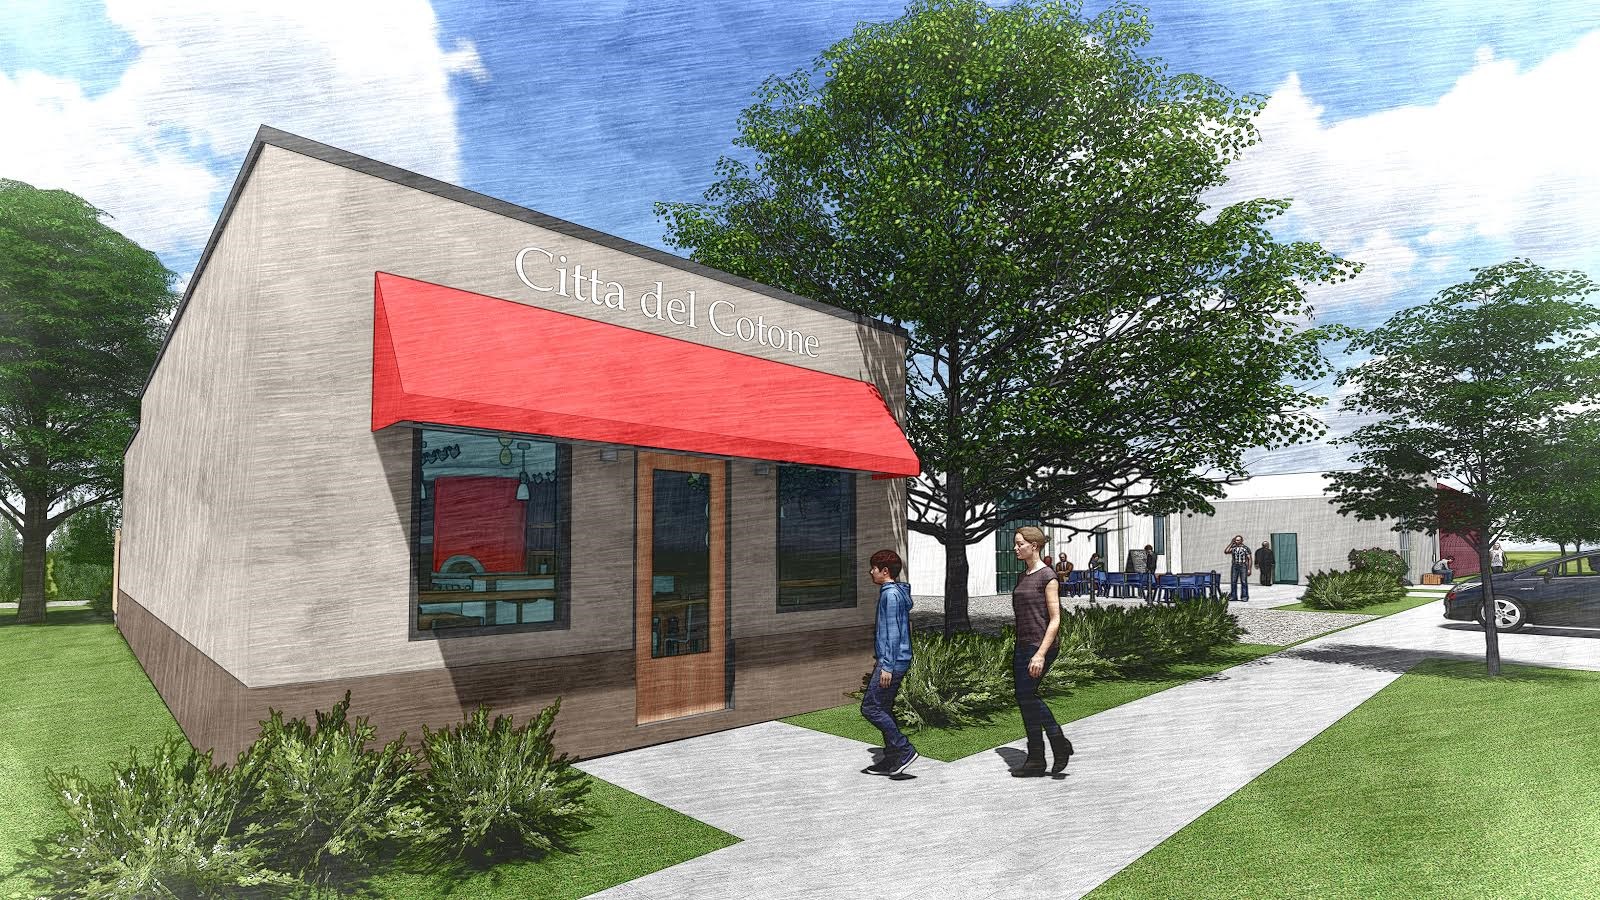 A rendering of Citta del Cotone, slated to open in September at 2150 Sumter St. in September. (Image/Provided)